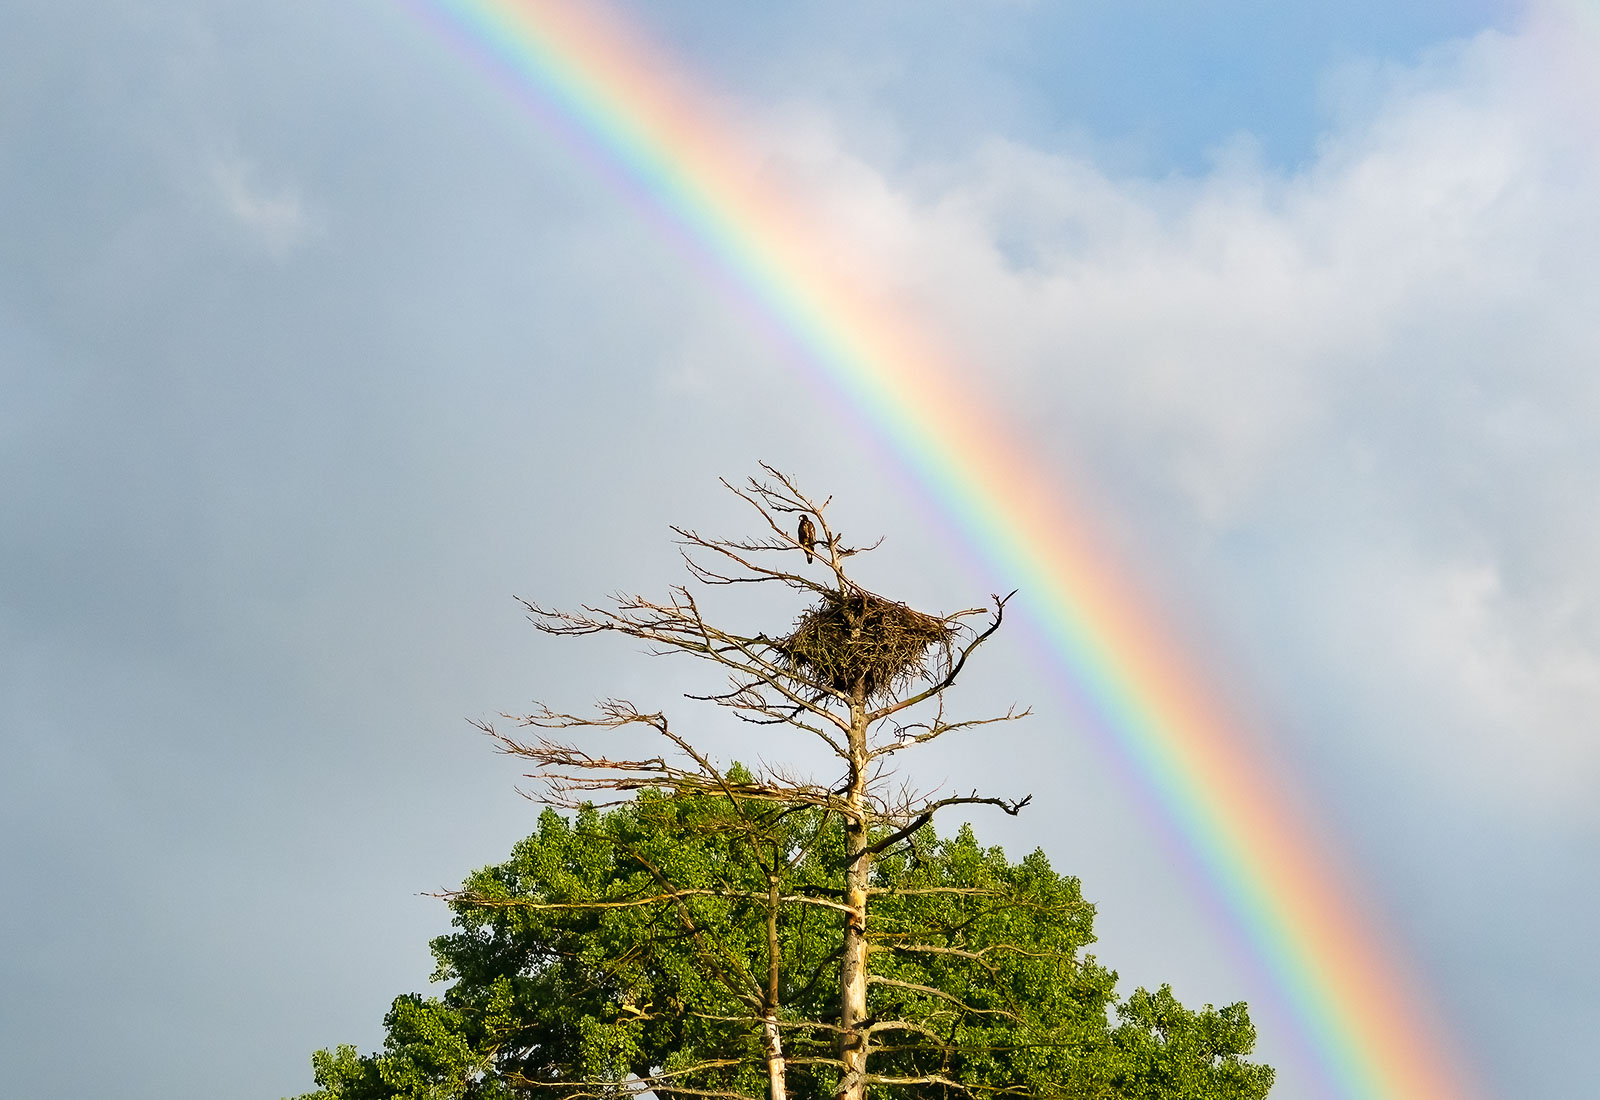 Juvenile Eagle at his nest with a rainbow